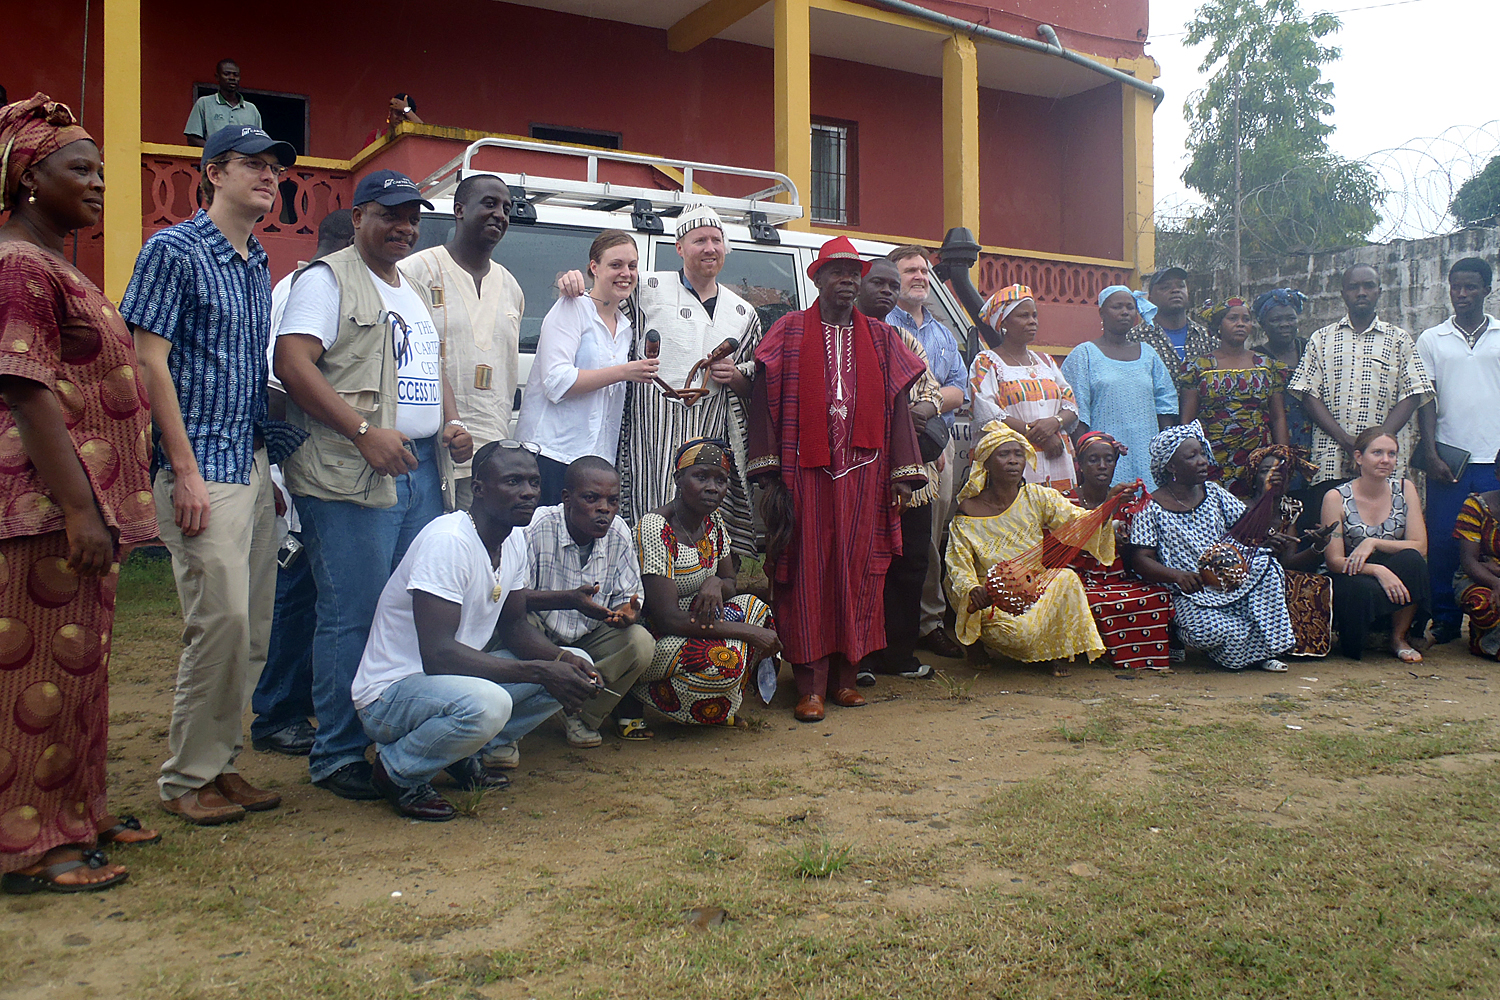 Carter Center staff with NTC members in Liberia